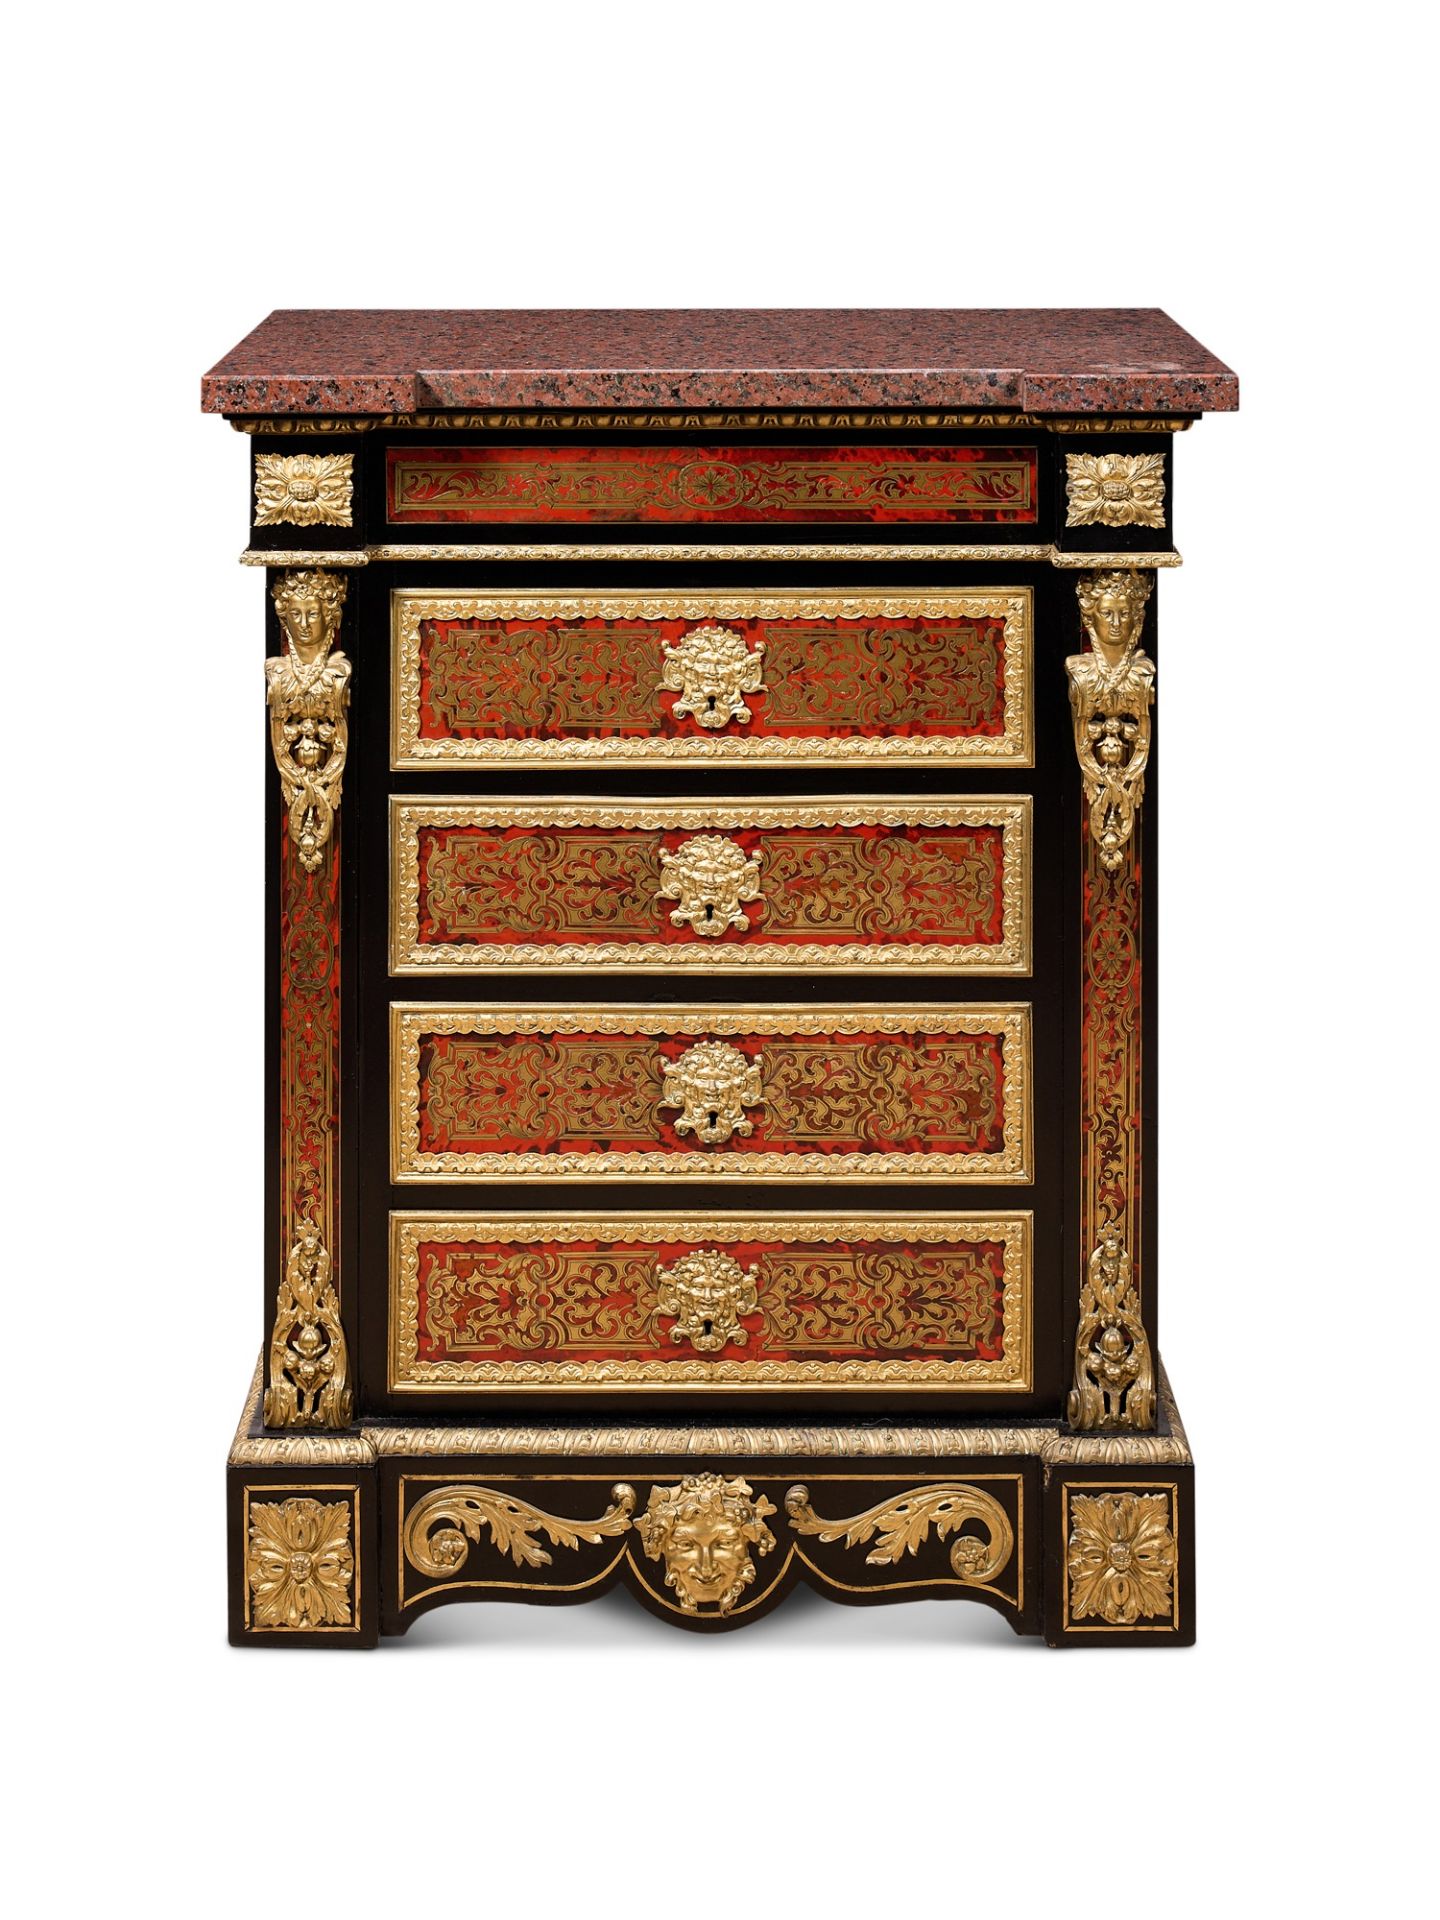 A FINE LATE 19TH CENTURY BOULLE STYLE TORTOISESHELL AND CUT BRASS CHEST OF DRAWERS - Image 2 of 8